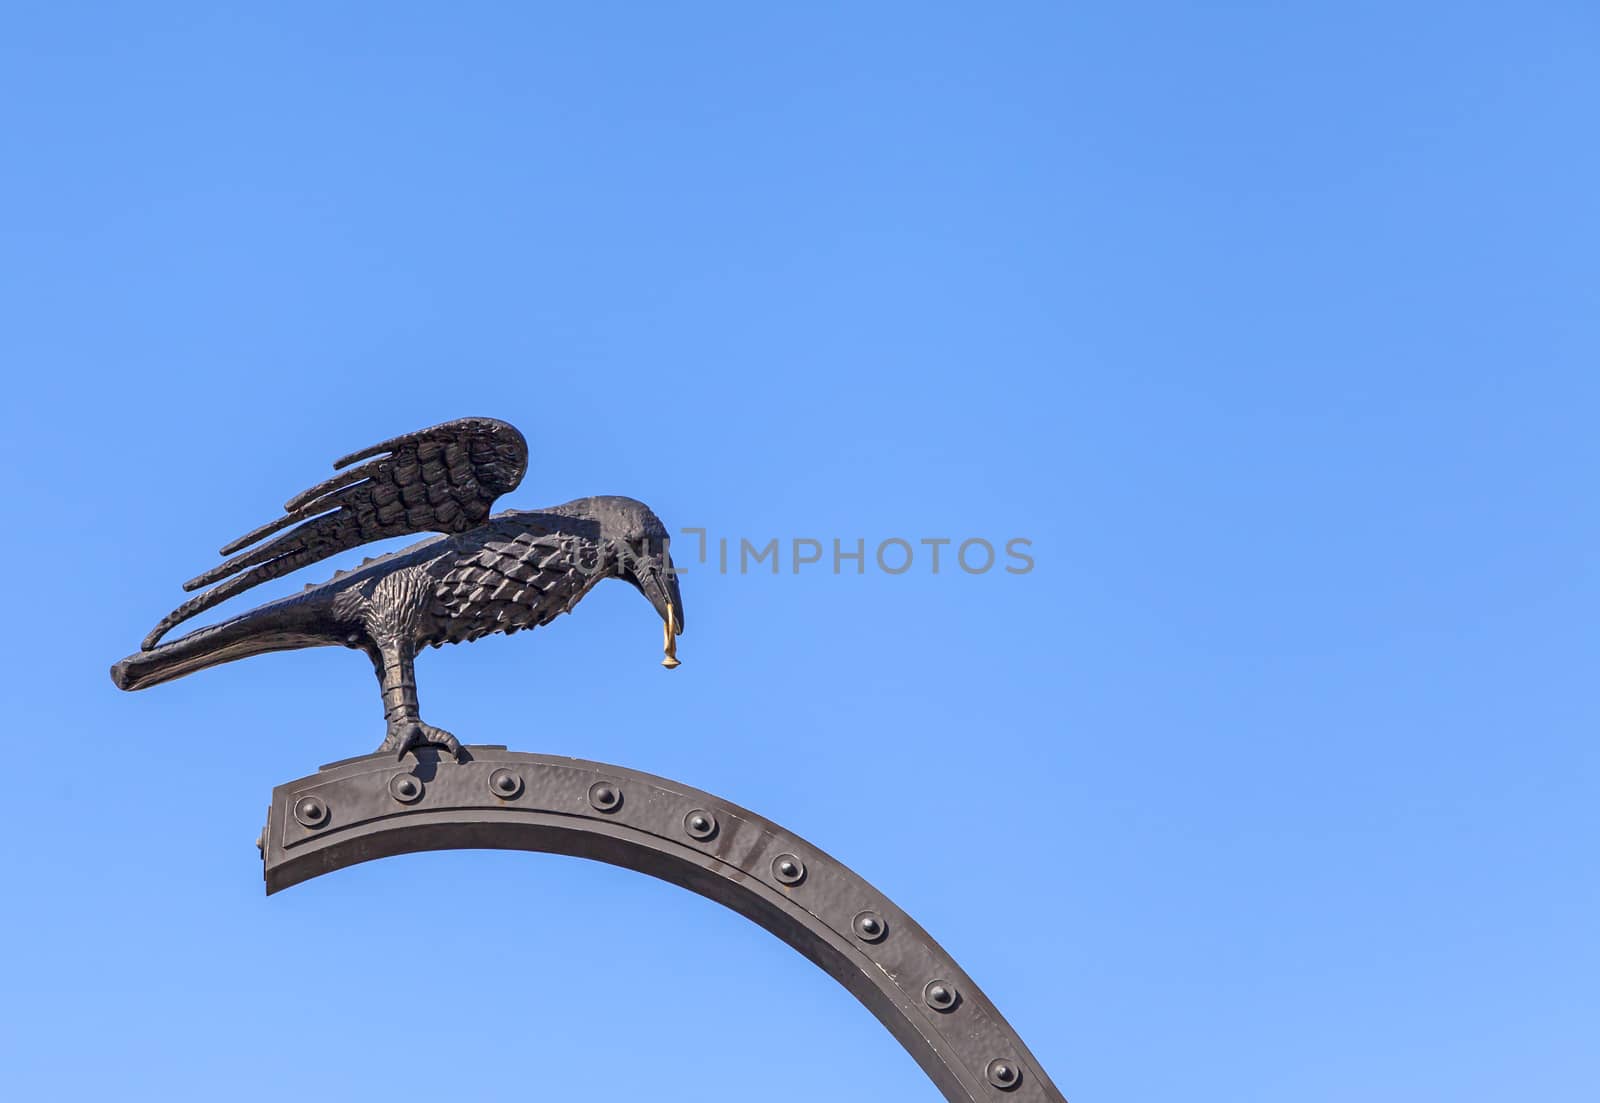 Raven carrying a gold ring on Corvin Gate of Royal Palace of Budapest, Hungary